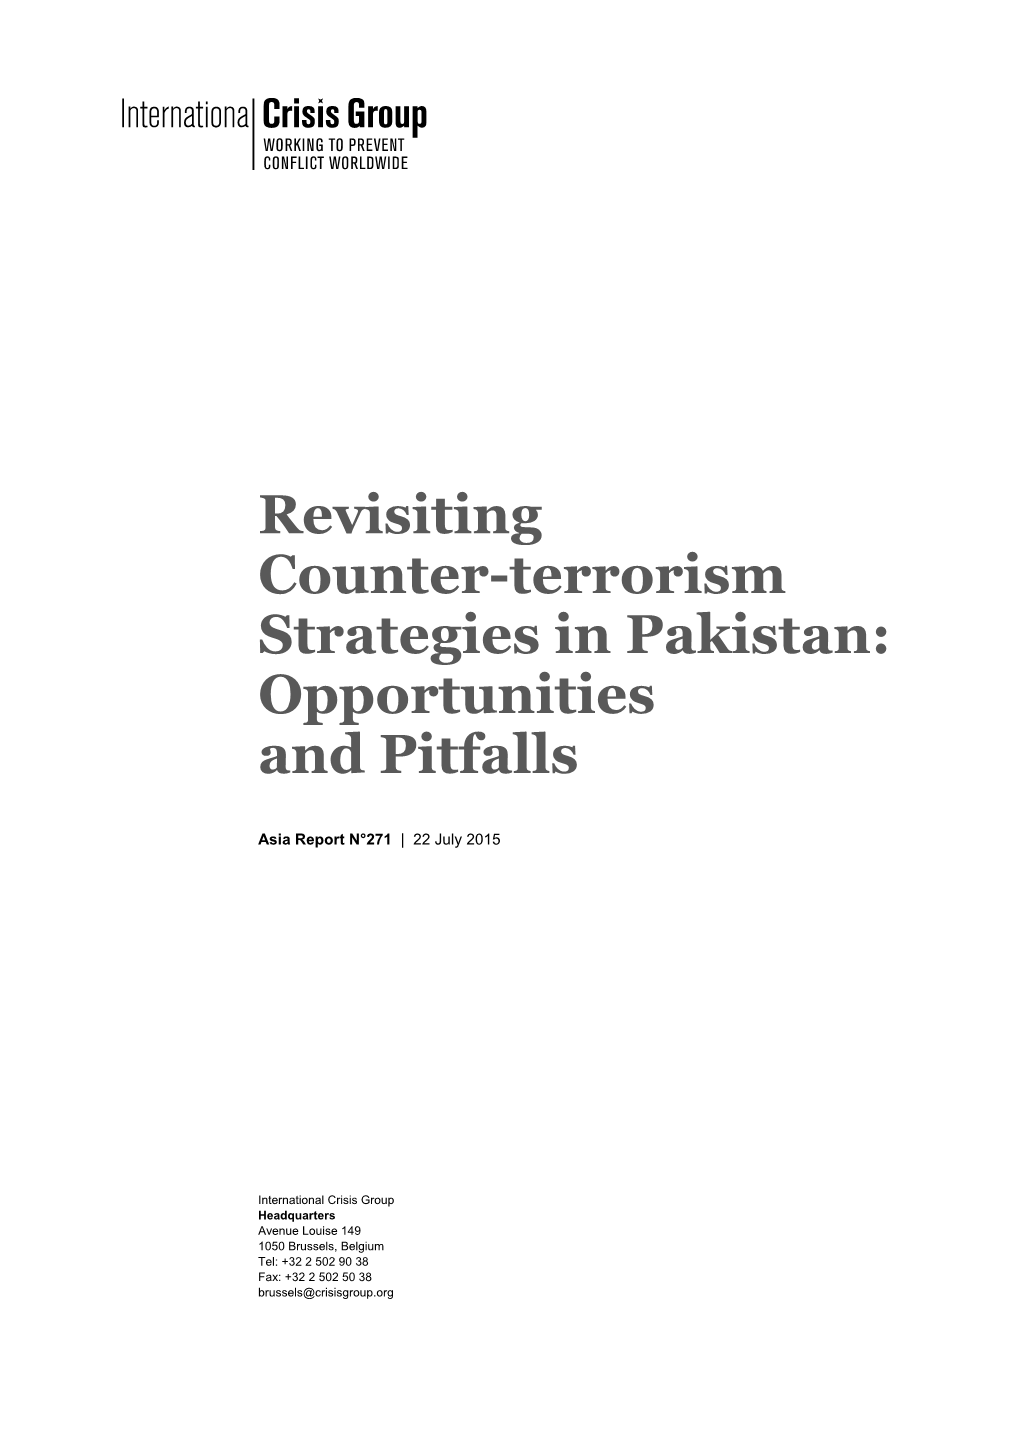 Revisiting Counter-Terrorism Strategies in Pakistan: Opportunities and Pitfalls